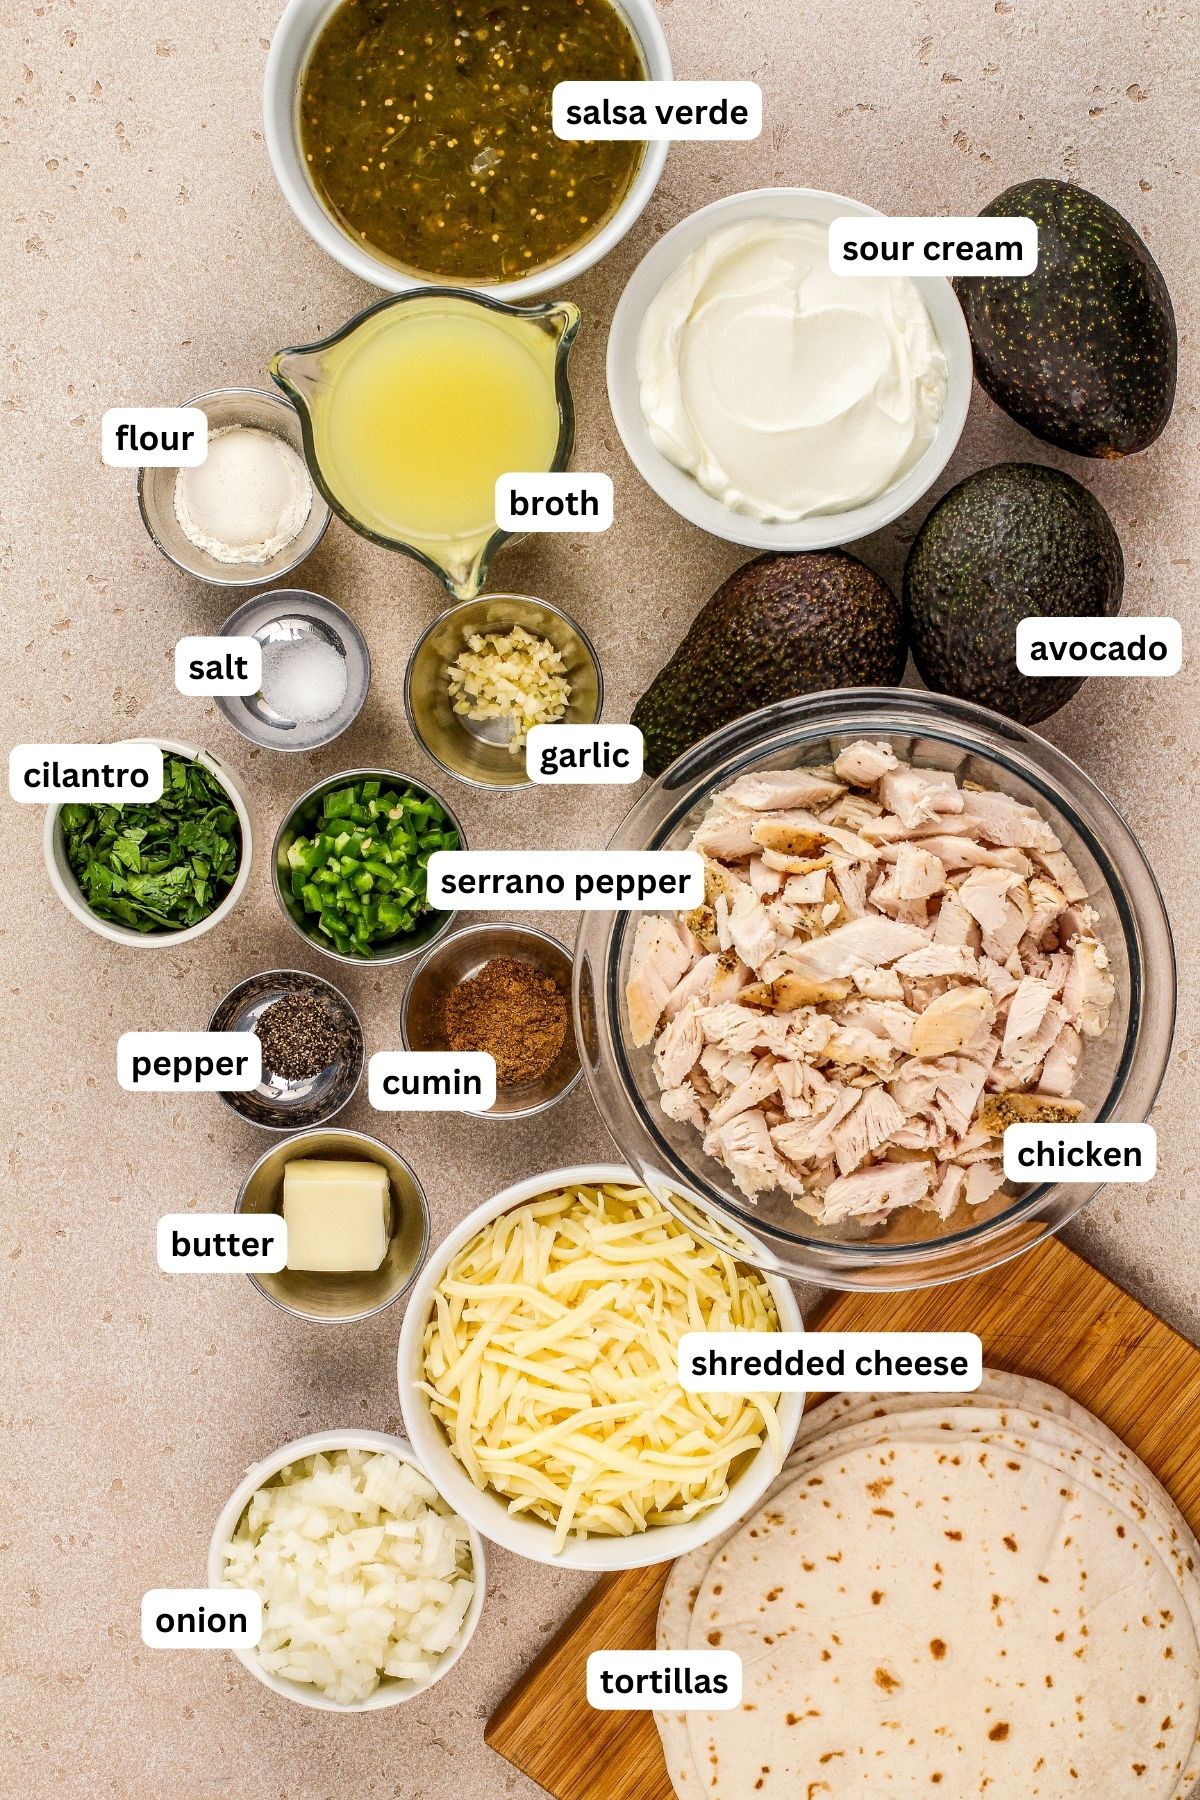 Ingredients for white chicken enchilada recipe arranged in bowls. From top to bottom: salsa verde, sour cream, flour, broth, avocado, salt, garlic, cilantro, serrano pepper, cooked chicken, pepper, cumin, butter, shredded cheese, onion and tortillas.